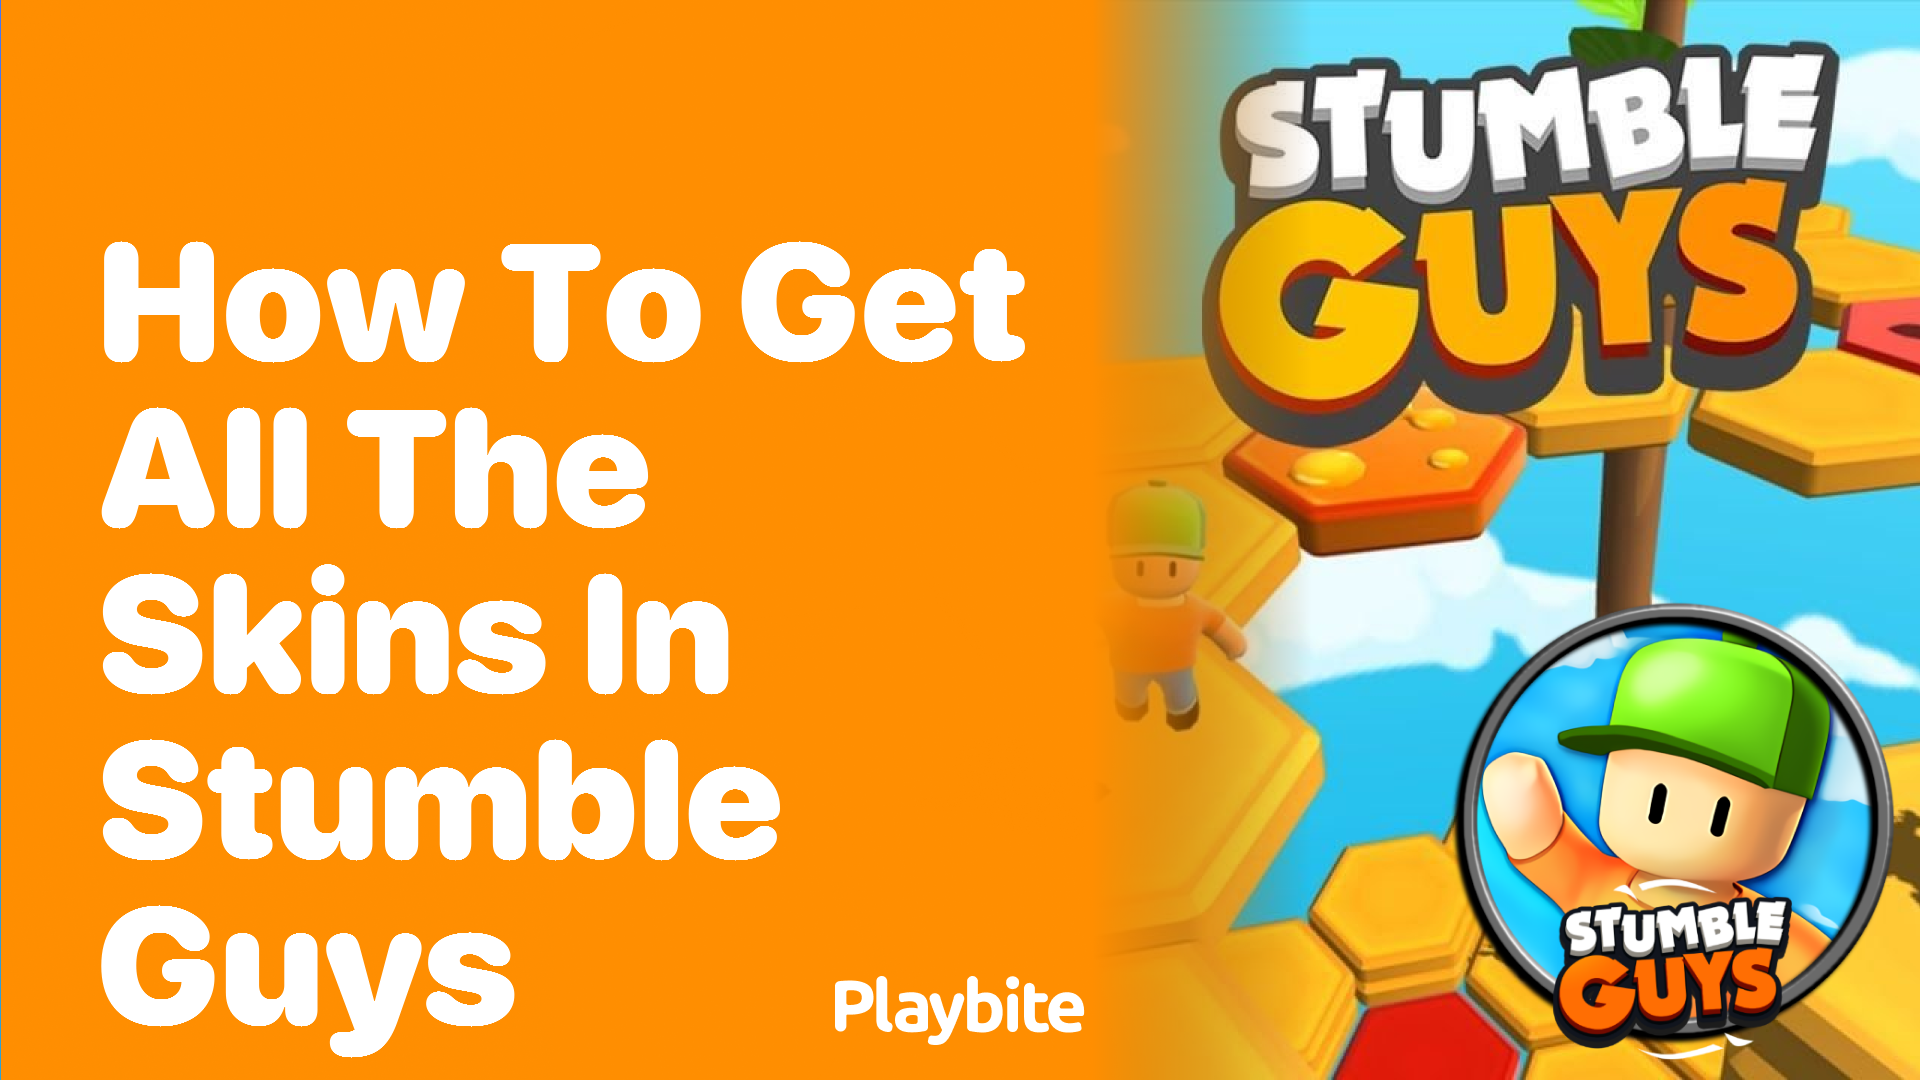 How to Get All the Skins in Stumble Guys